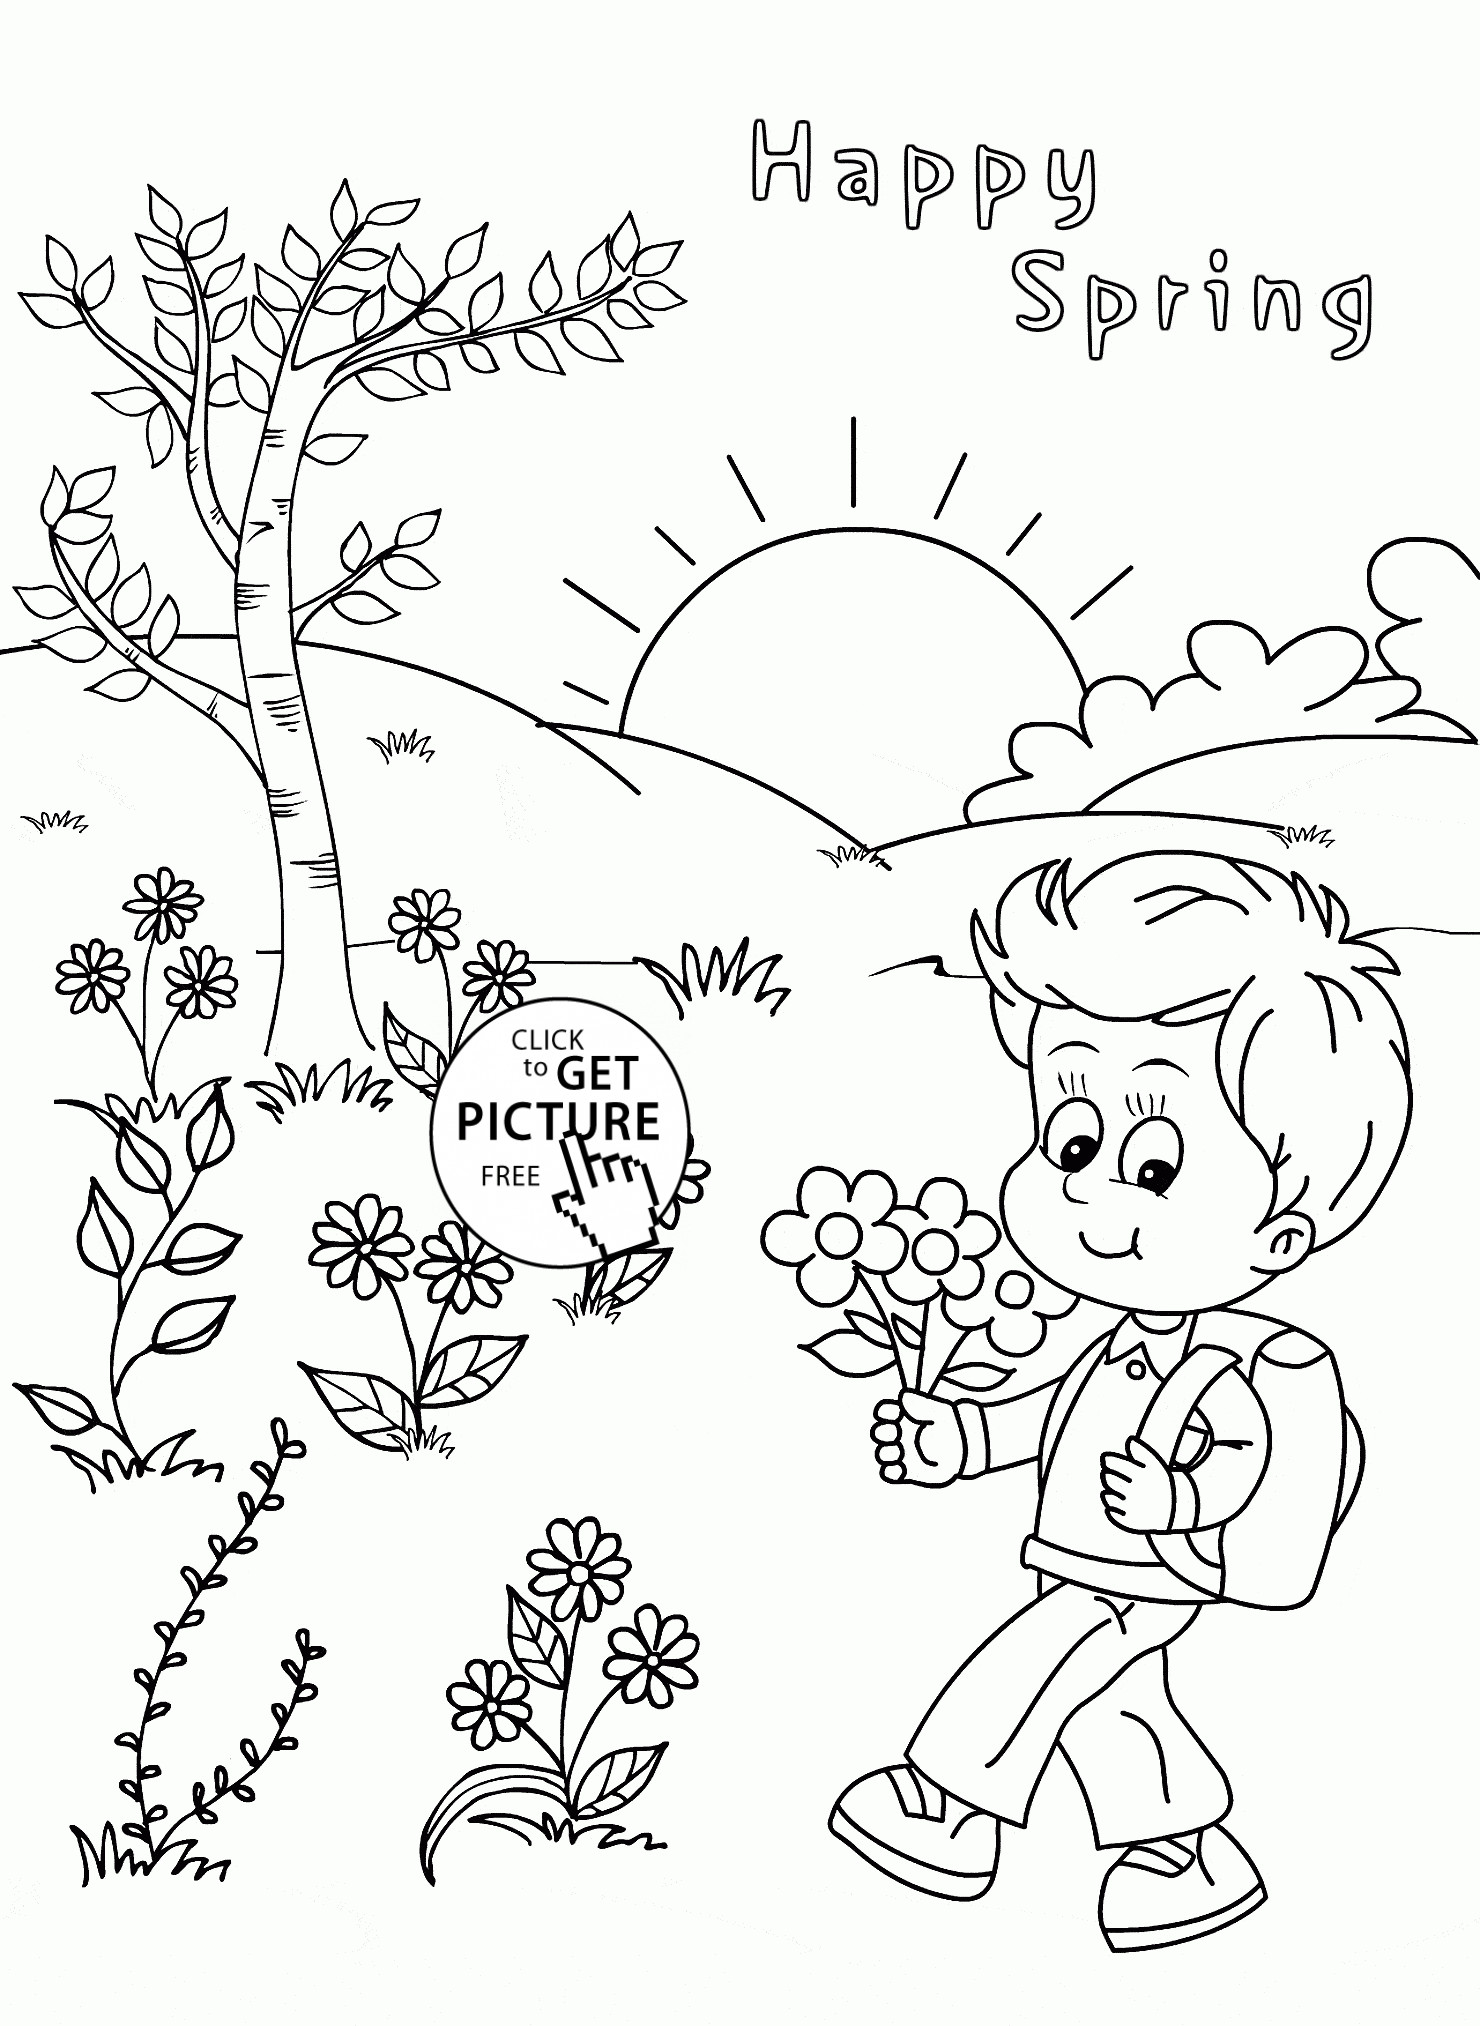 Kids Spring Coloring Pages
 Happy Spring coloring page for kids seasons coloring